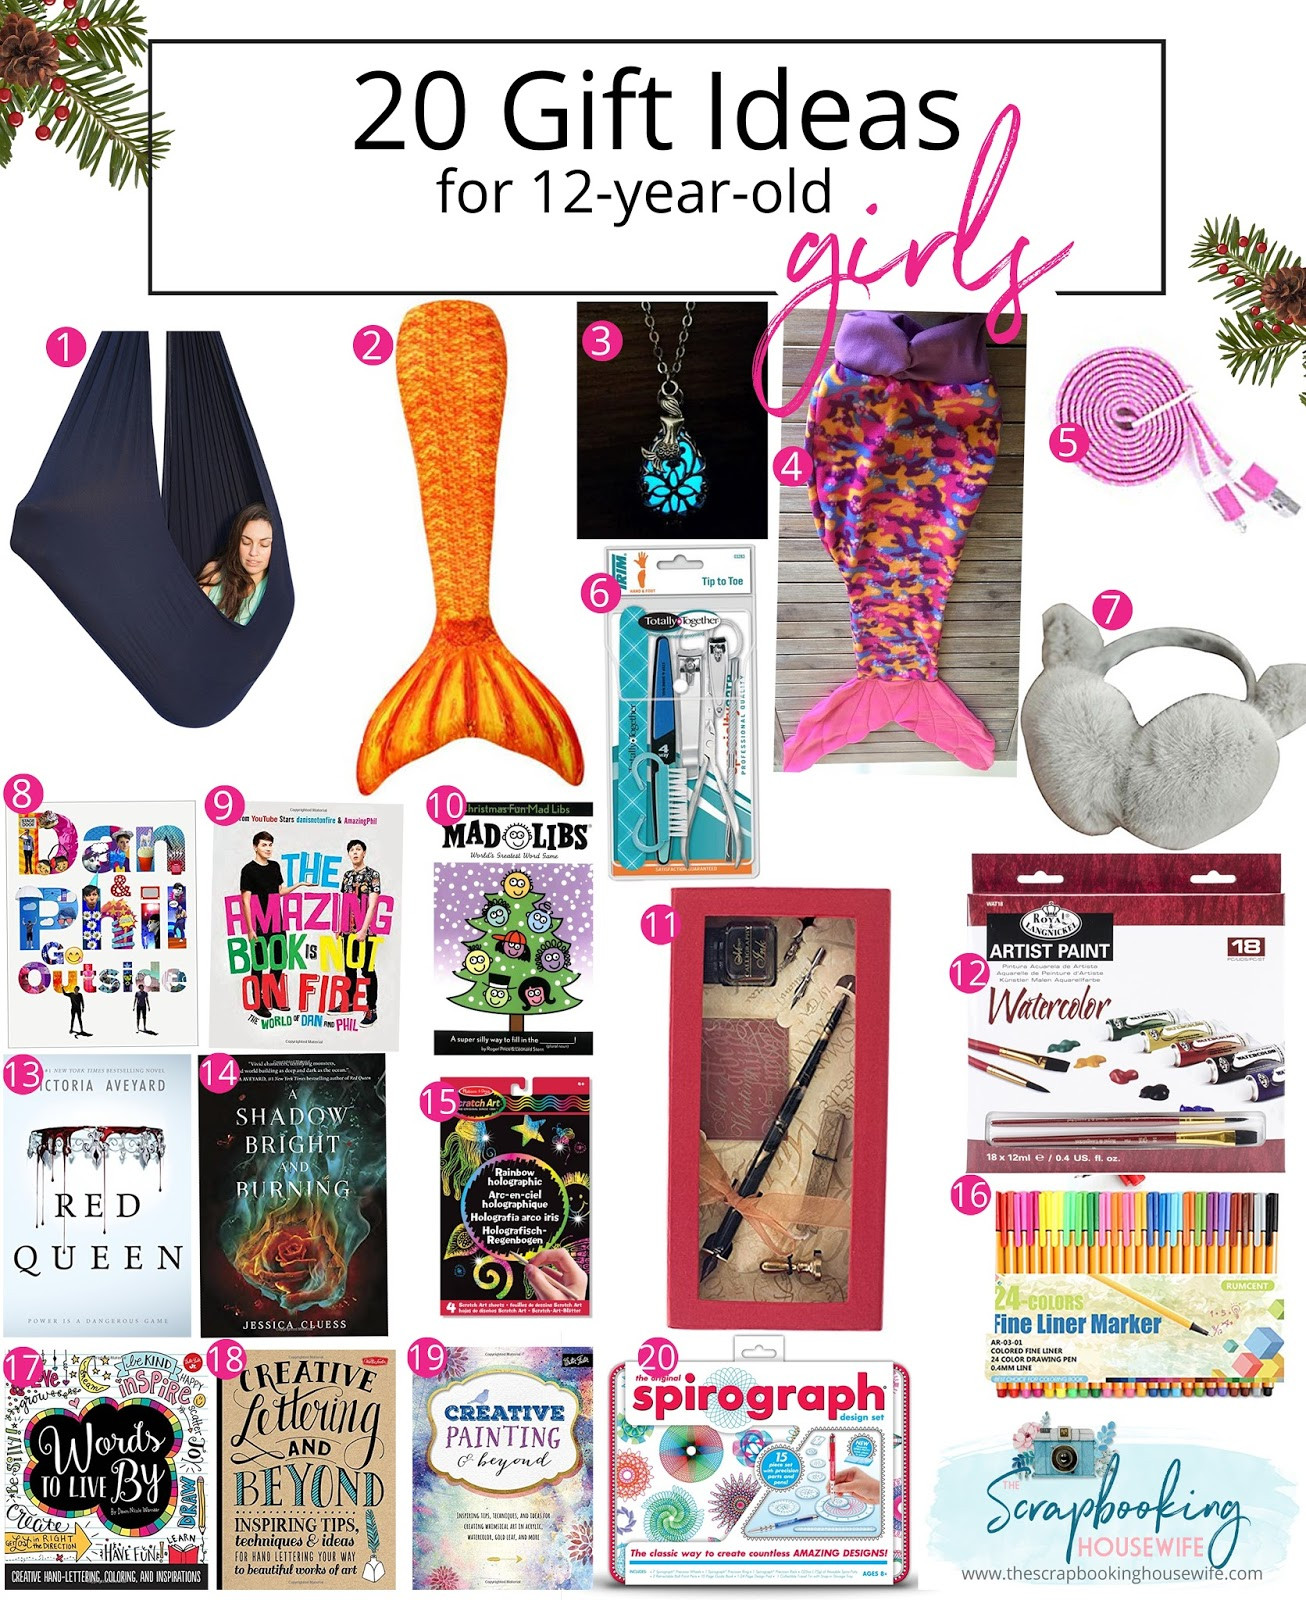 20 Year Old Birthday Gift Ideas
 Ellabella Designs 13 GIFT IDEAS FOR TODDLERS